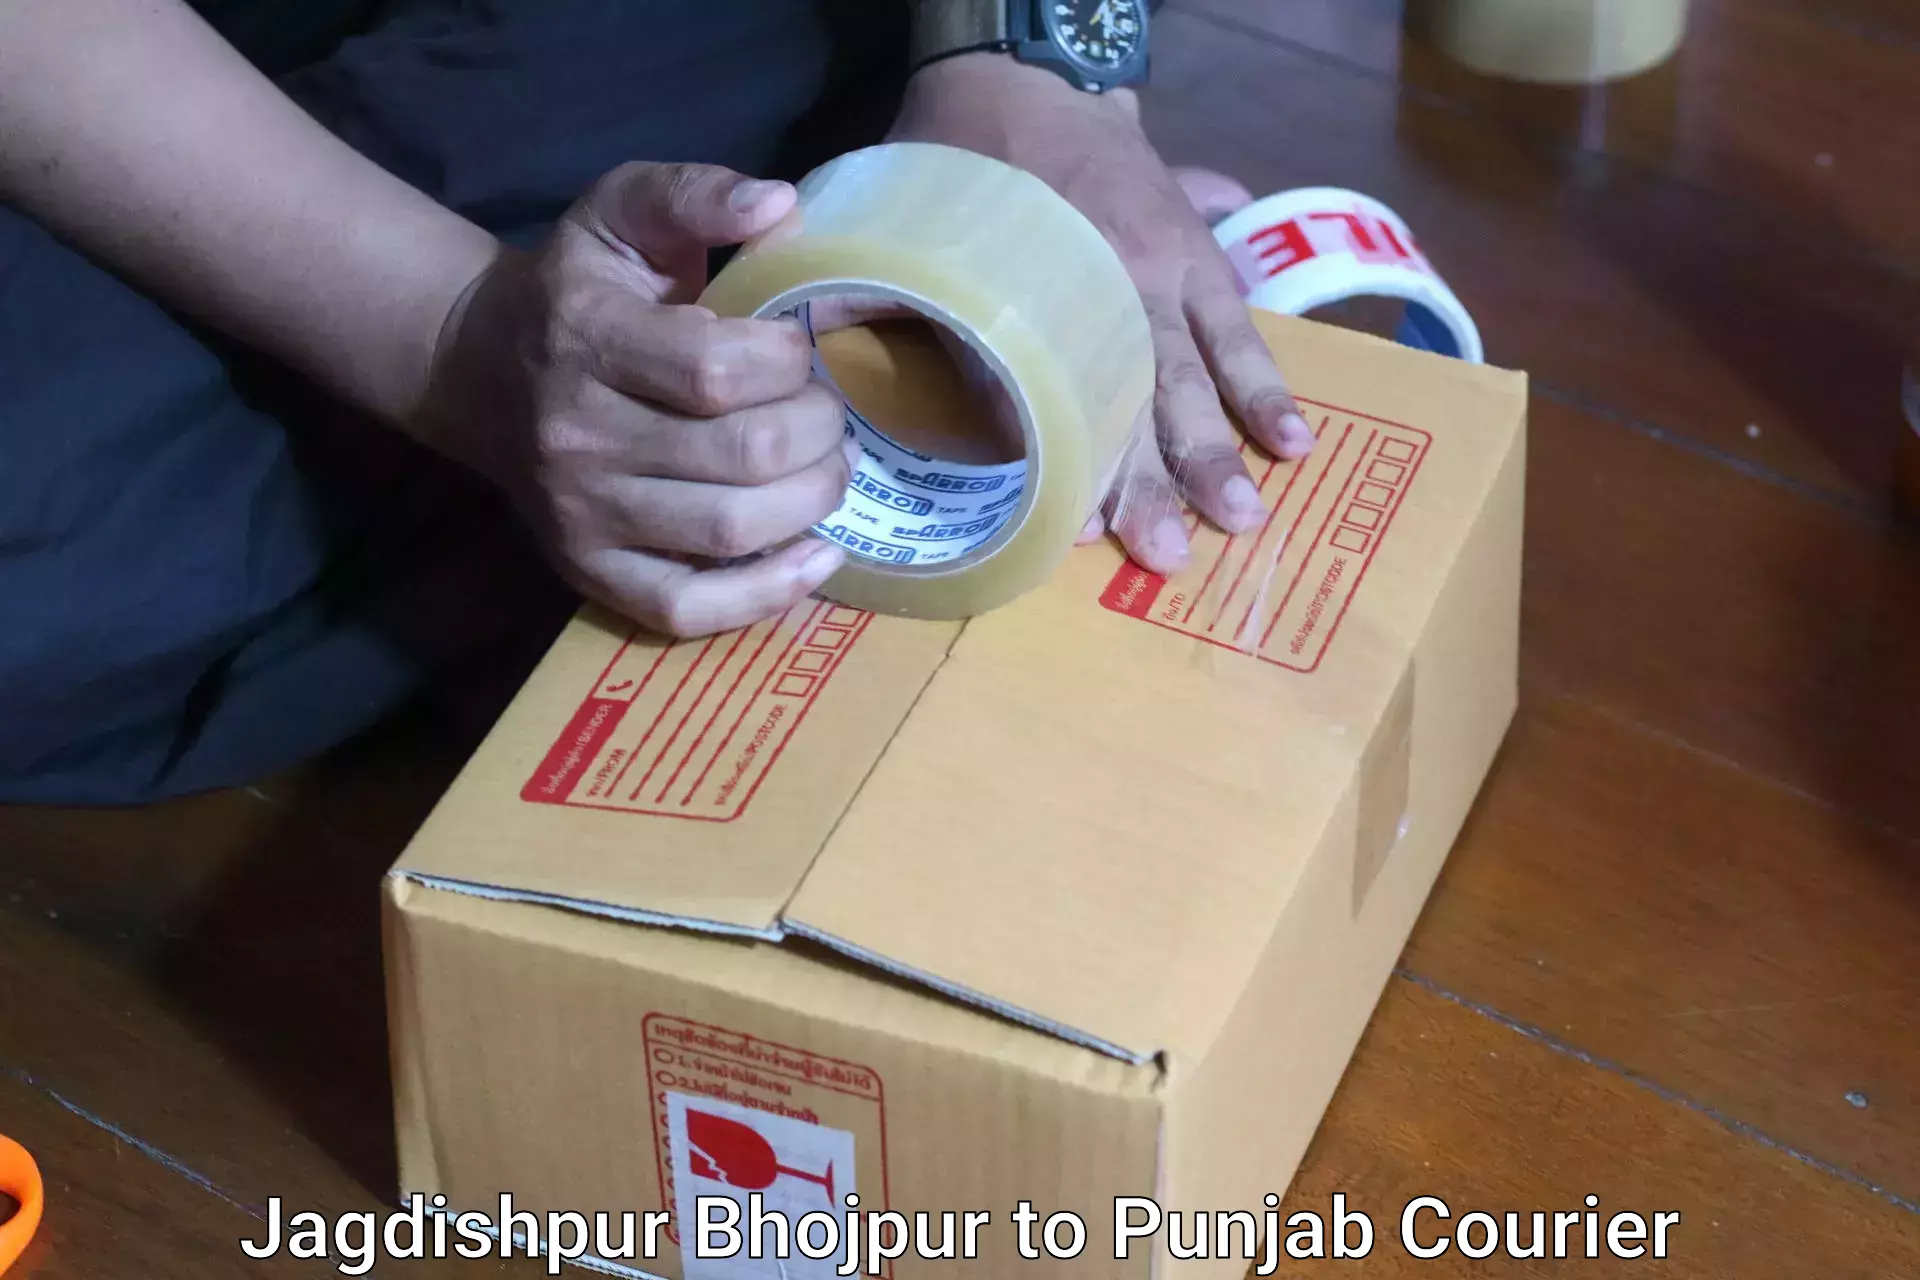 Luggage delivery network Jagdishpur Bhojpur to Mohali